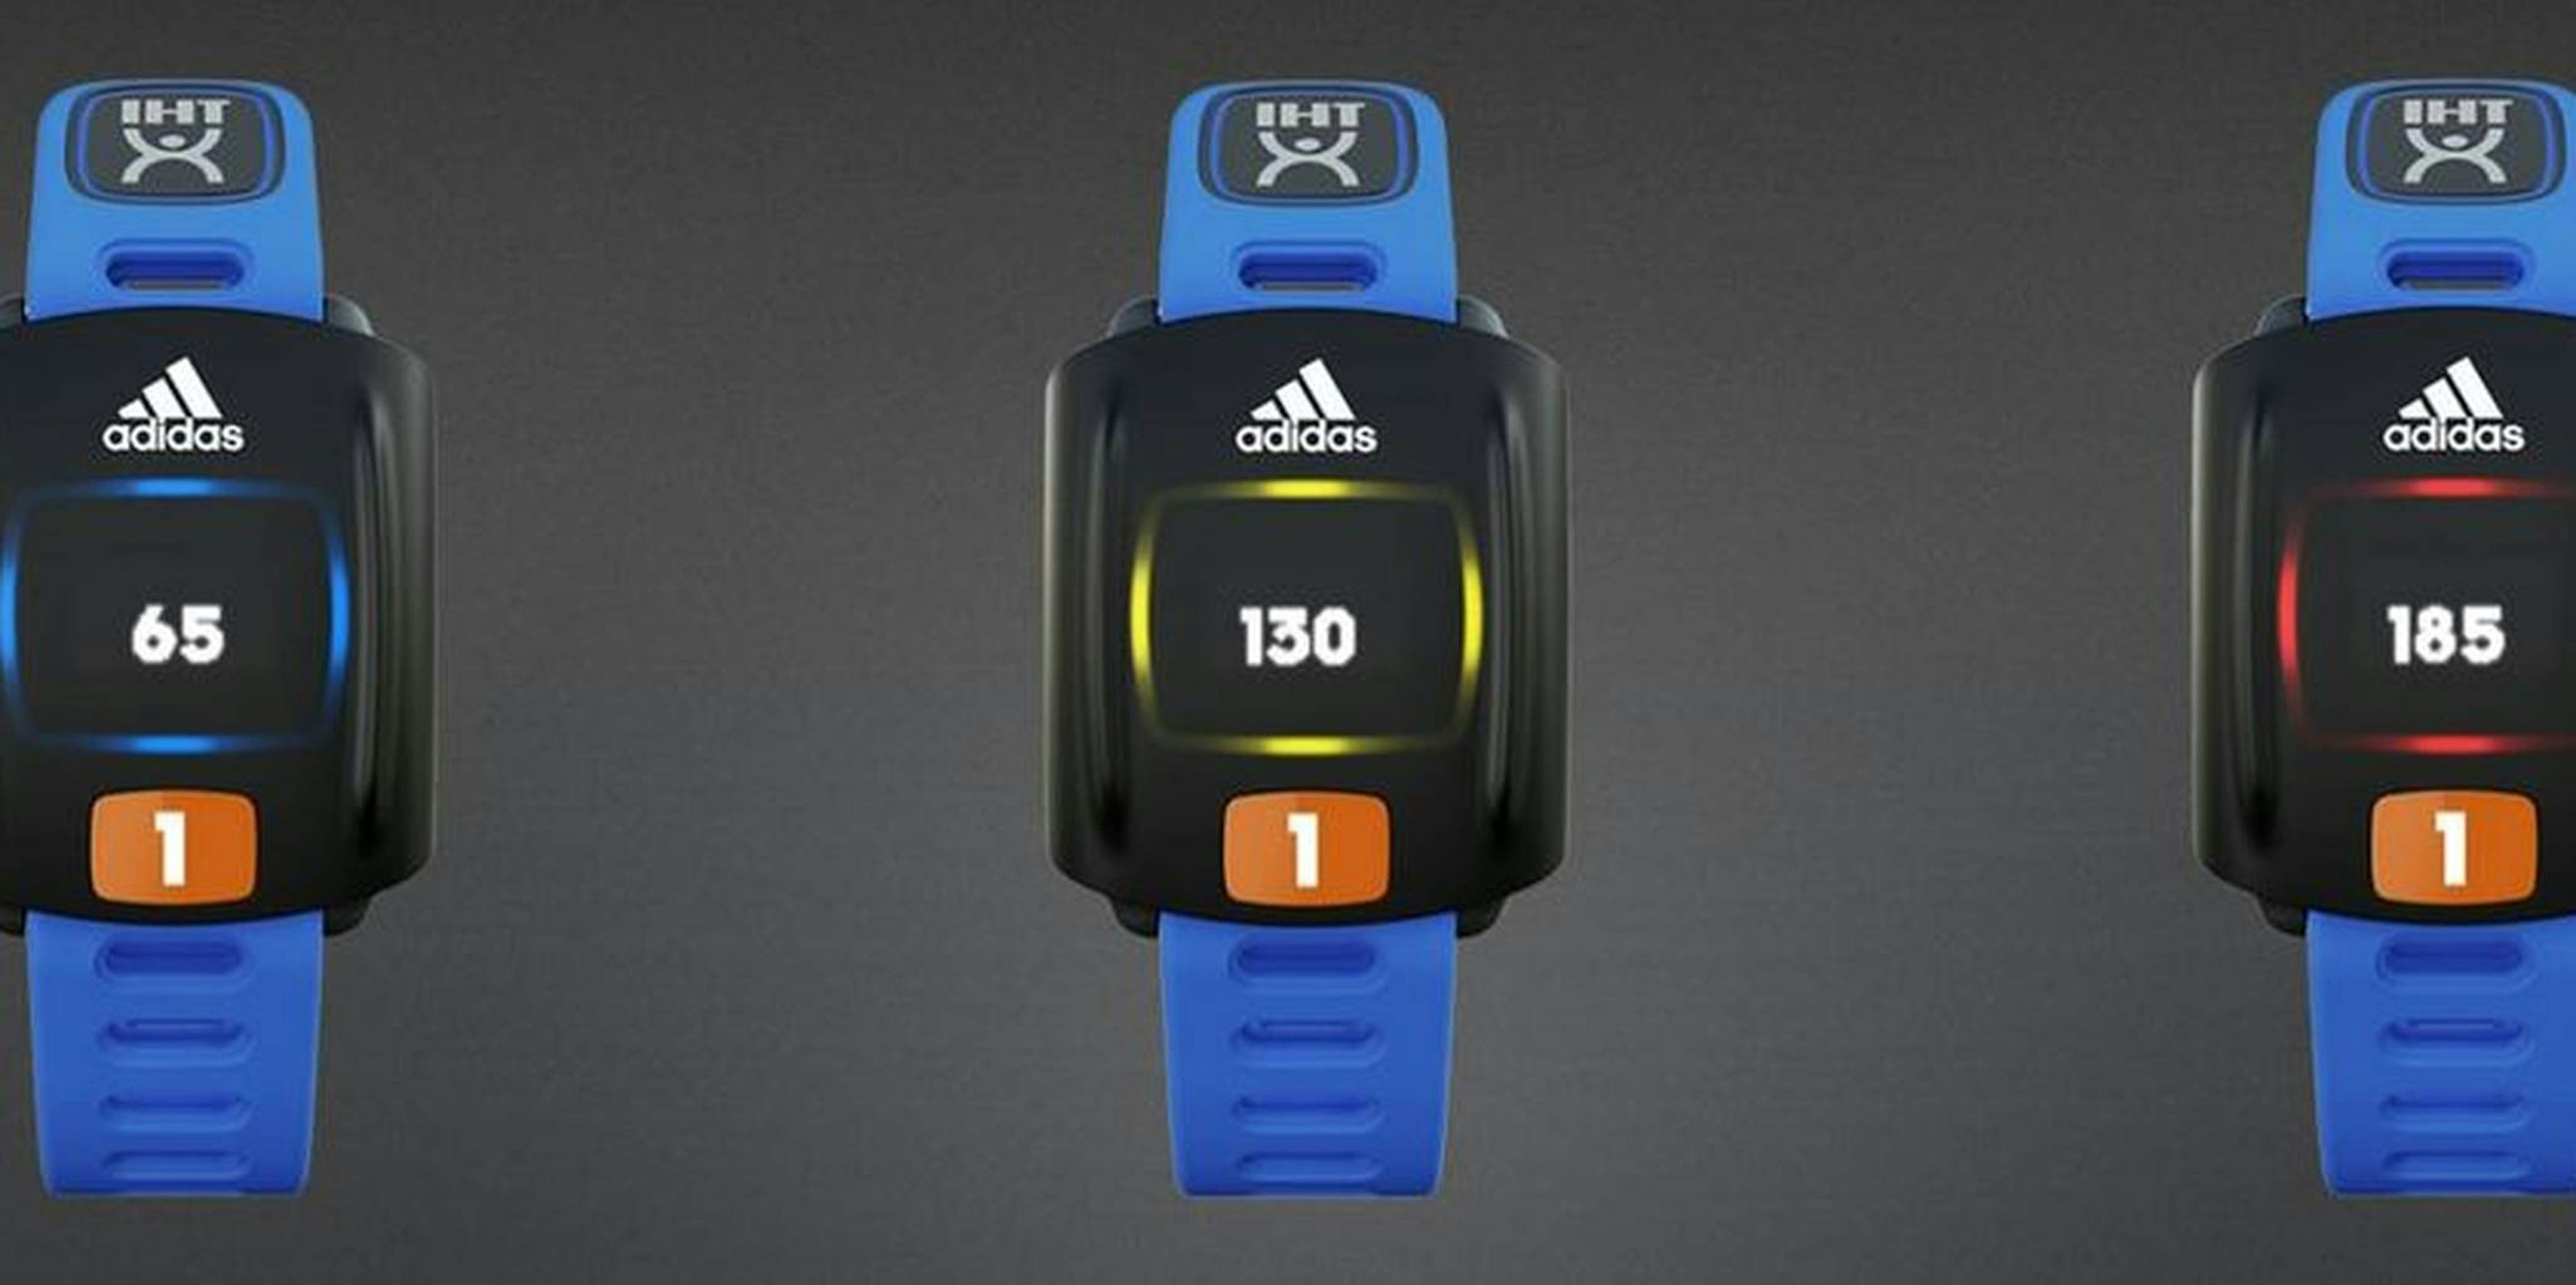 New Adidas fitness tracker lets gym teachers their students - The Dot